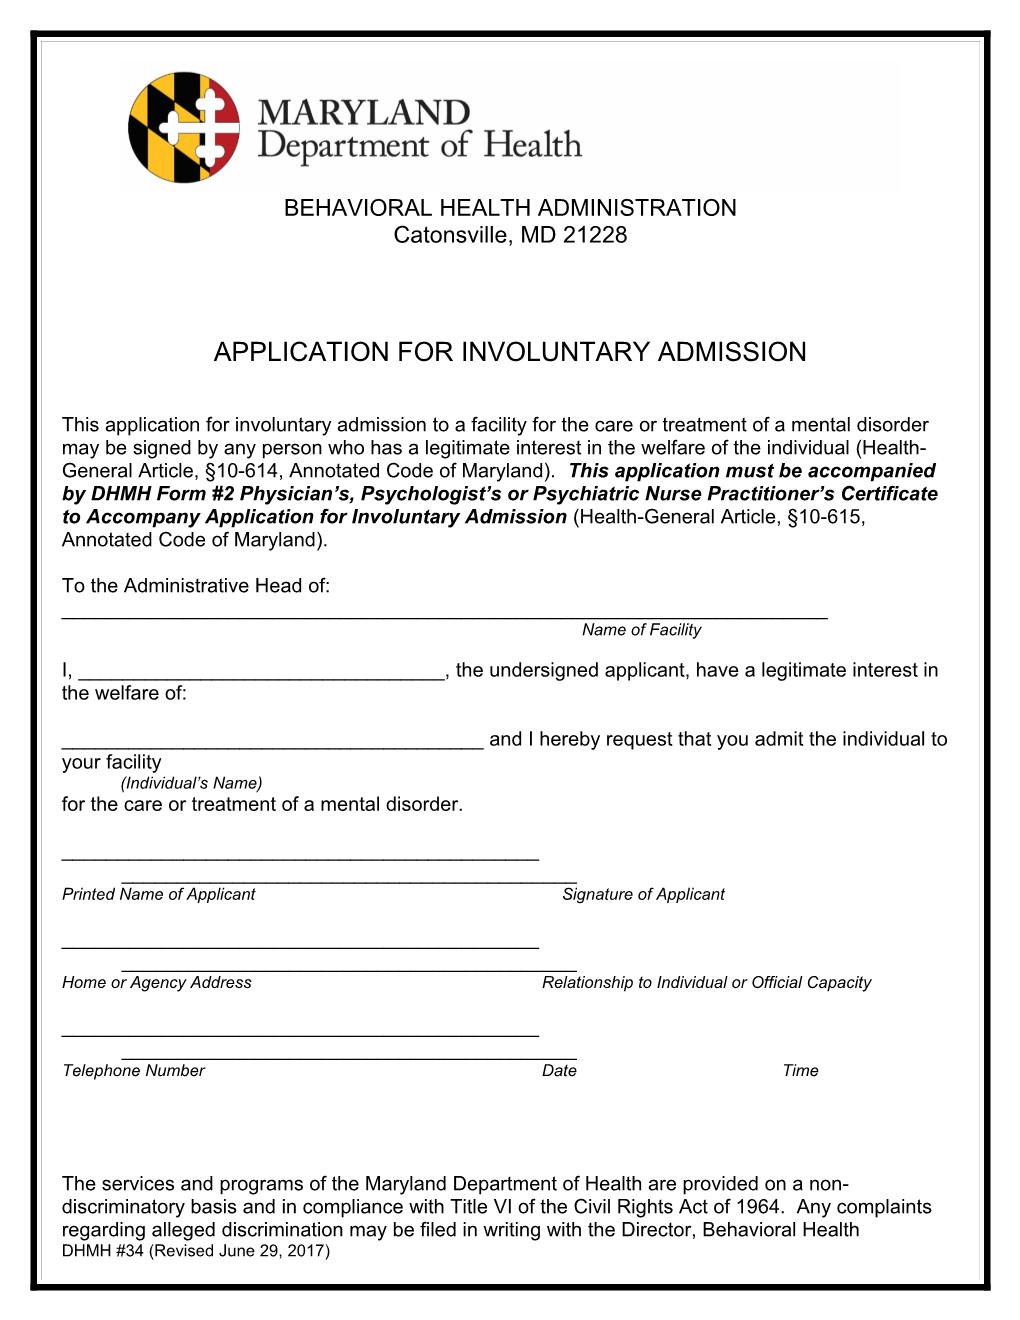 Application for Involuntary Admission